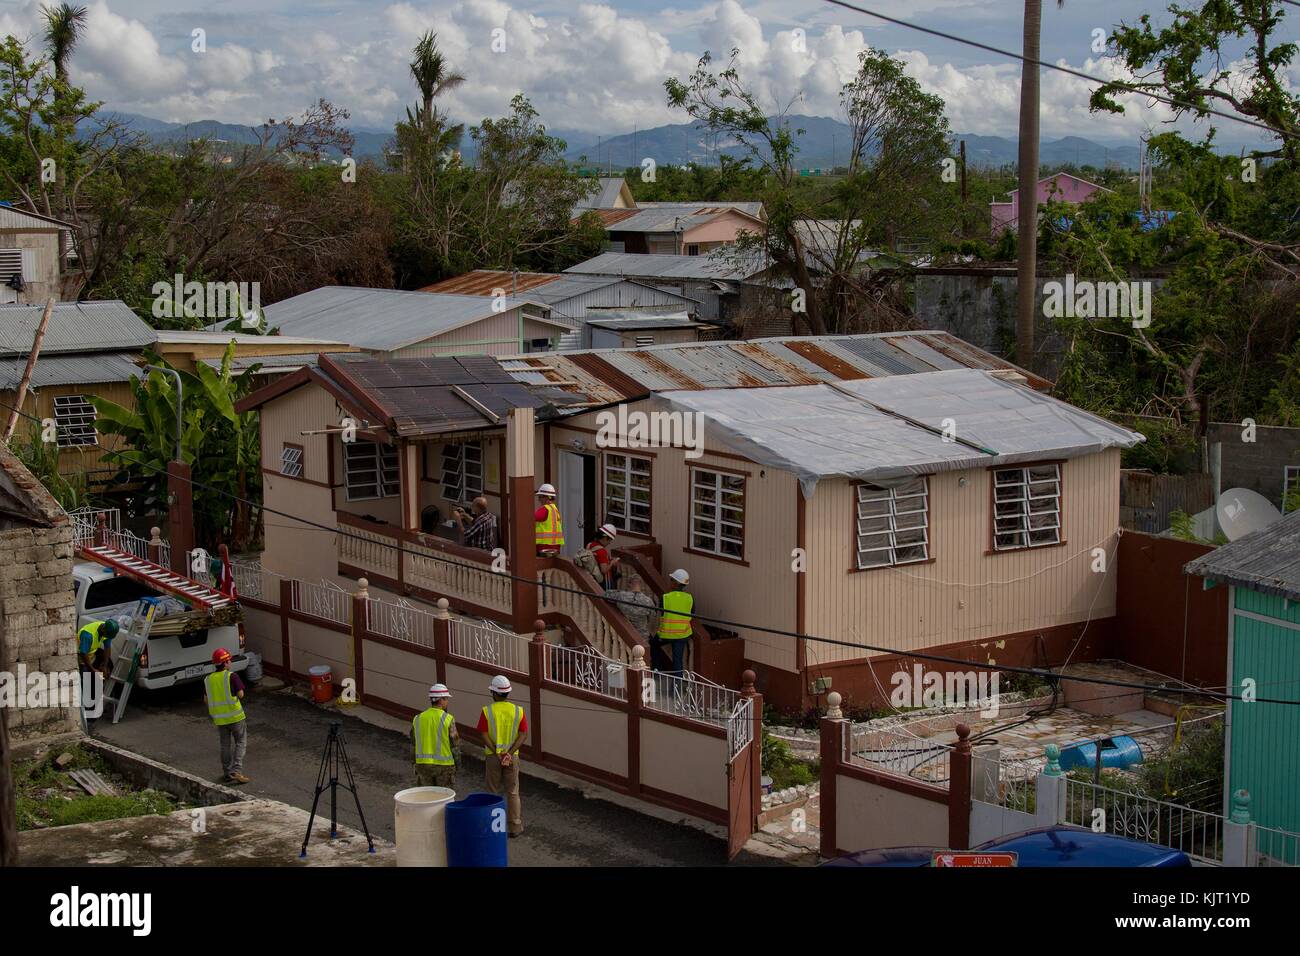 U.S. Army soldiers replaced damaged roofs with blue plastic tarps during relief efforts in the aftermath of Hurricane Maria October 28, 2017 in Ponce, Puerto Rico. (photo by Avery Cunningham via Planetpix) Stock Photo